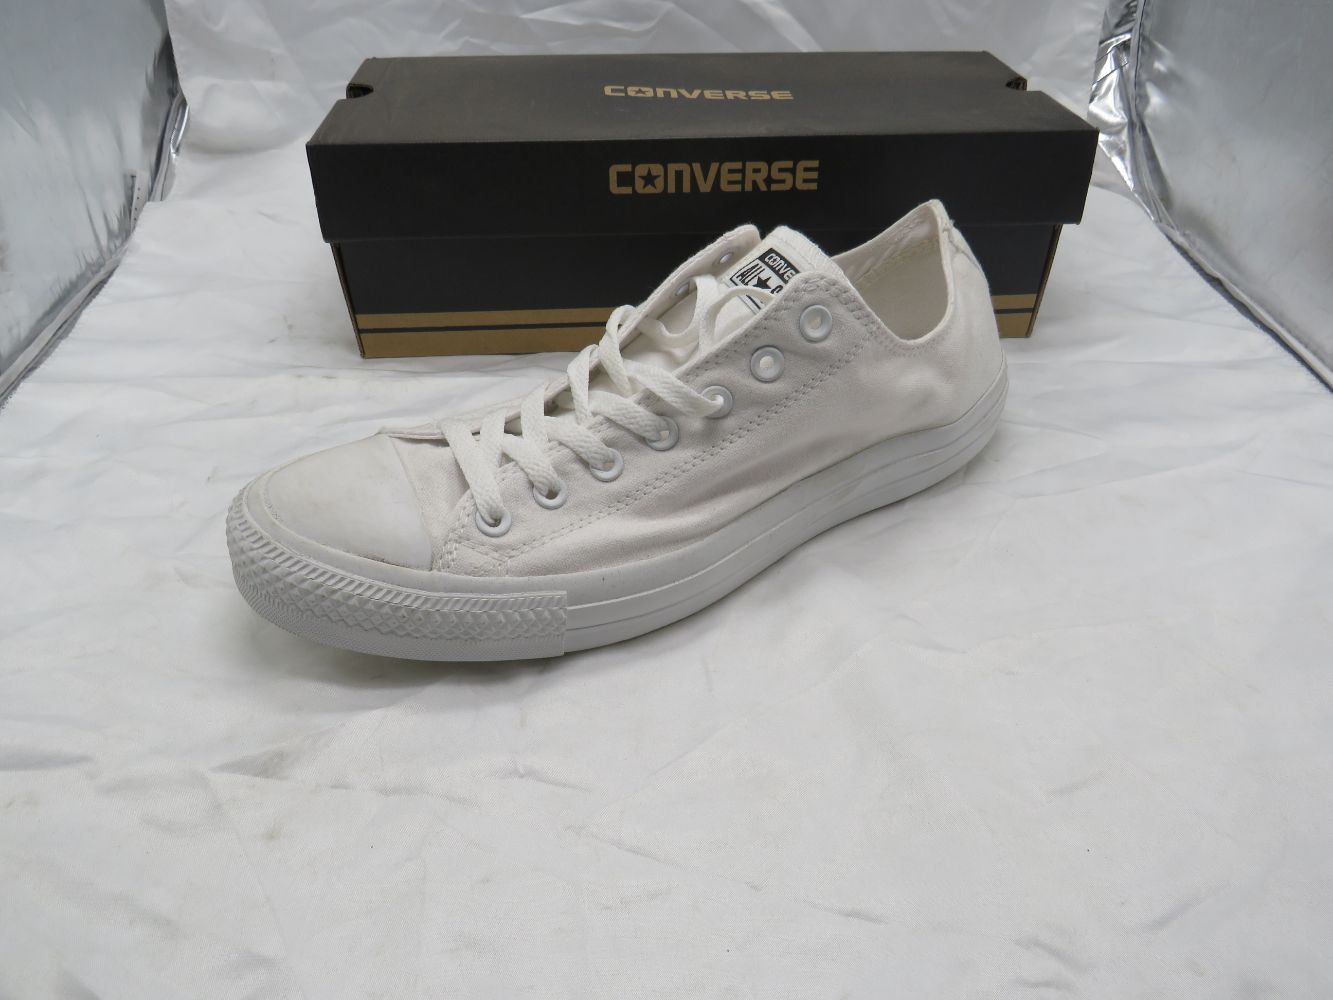 CONVERSE ALL STARS TRAINERS STARTING BID ONLY £10 NEW & BOXED